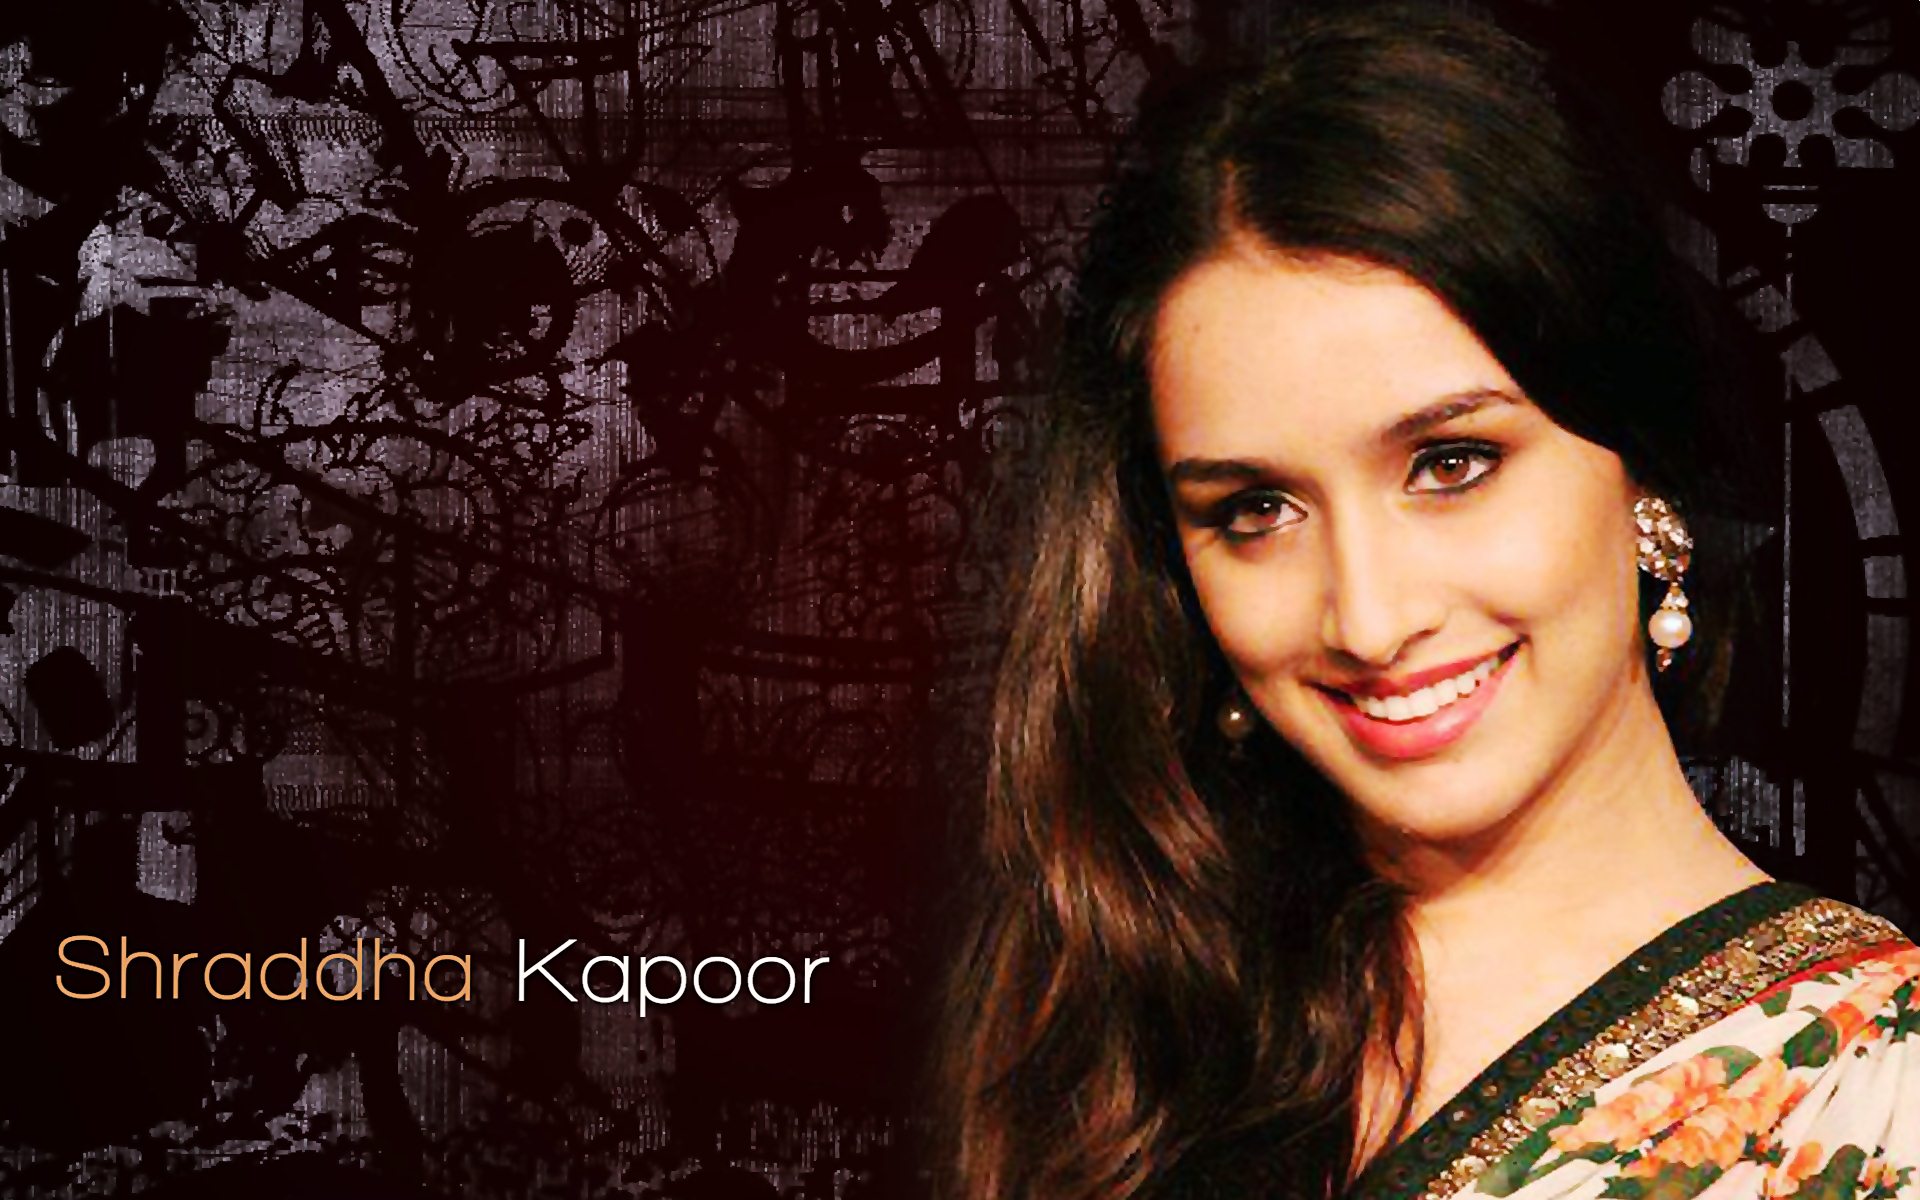 Shraddha Kapoor Photos, Images, Pictures & Wallpapers - Download Image Of Shraddha Kapoor , HD Wallpaper & Backgrounds